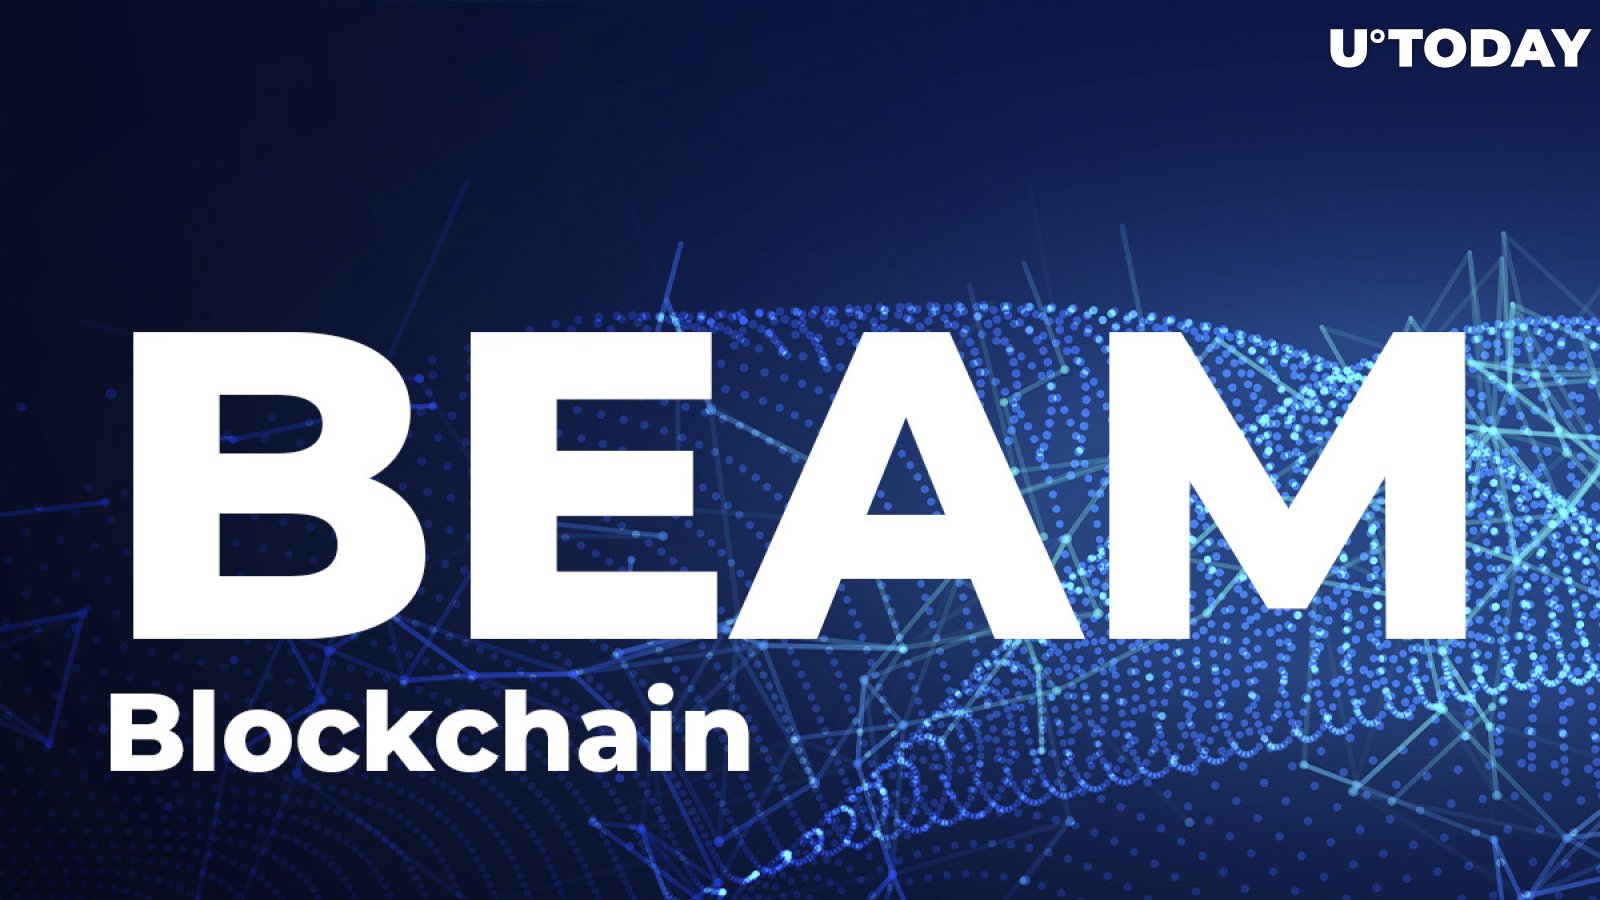 Beam (BEAM) Updates Roadmap With New BeamX DeFi Ecosystem, Completes Hard Fork, Teases New Tools Release